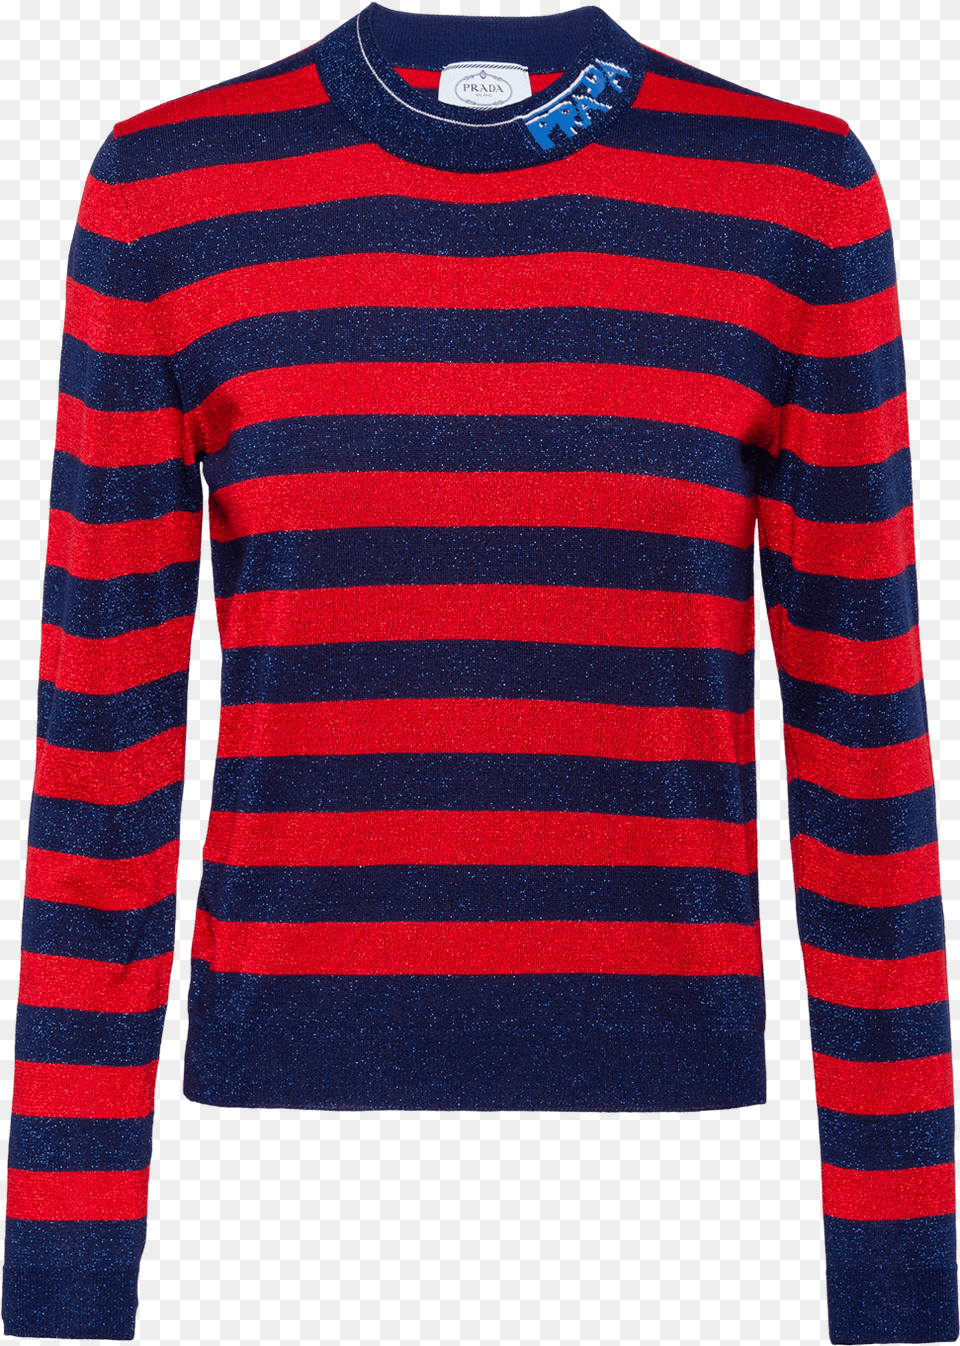 Sweater, Clothing, Knitwear, Long Sleeve, Sleeve Png Image